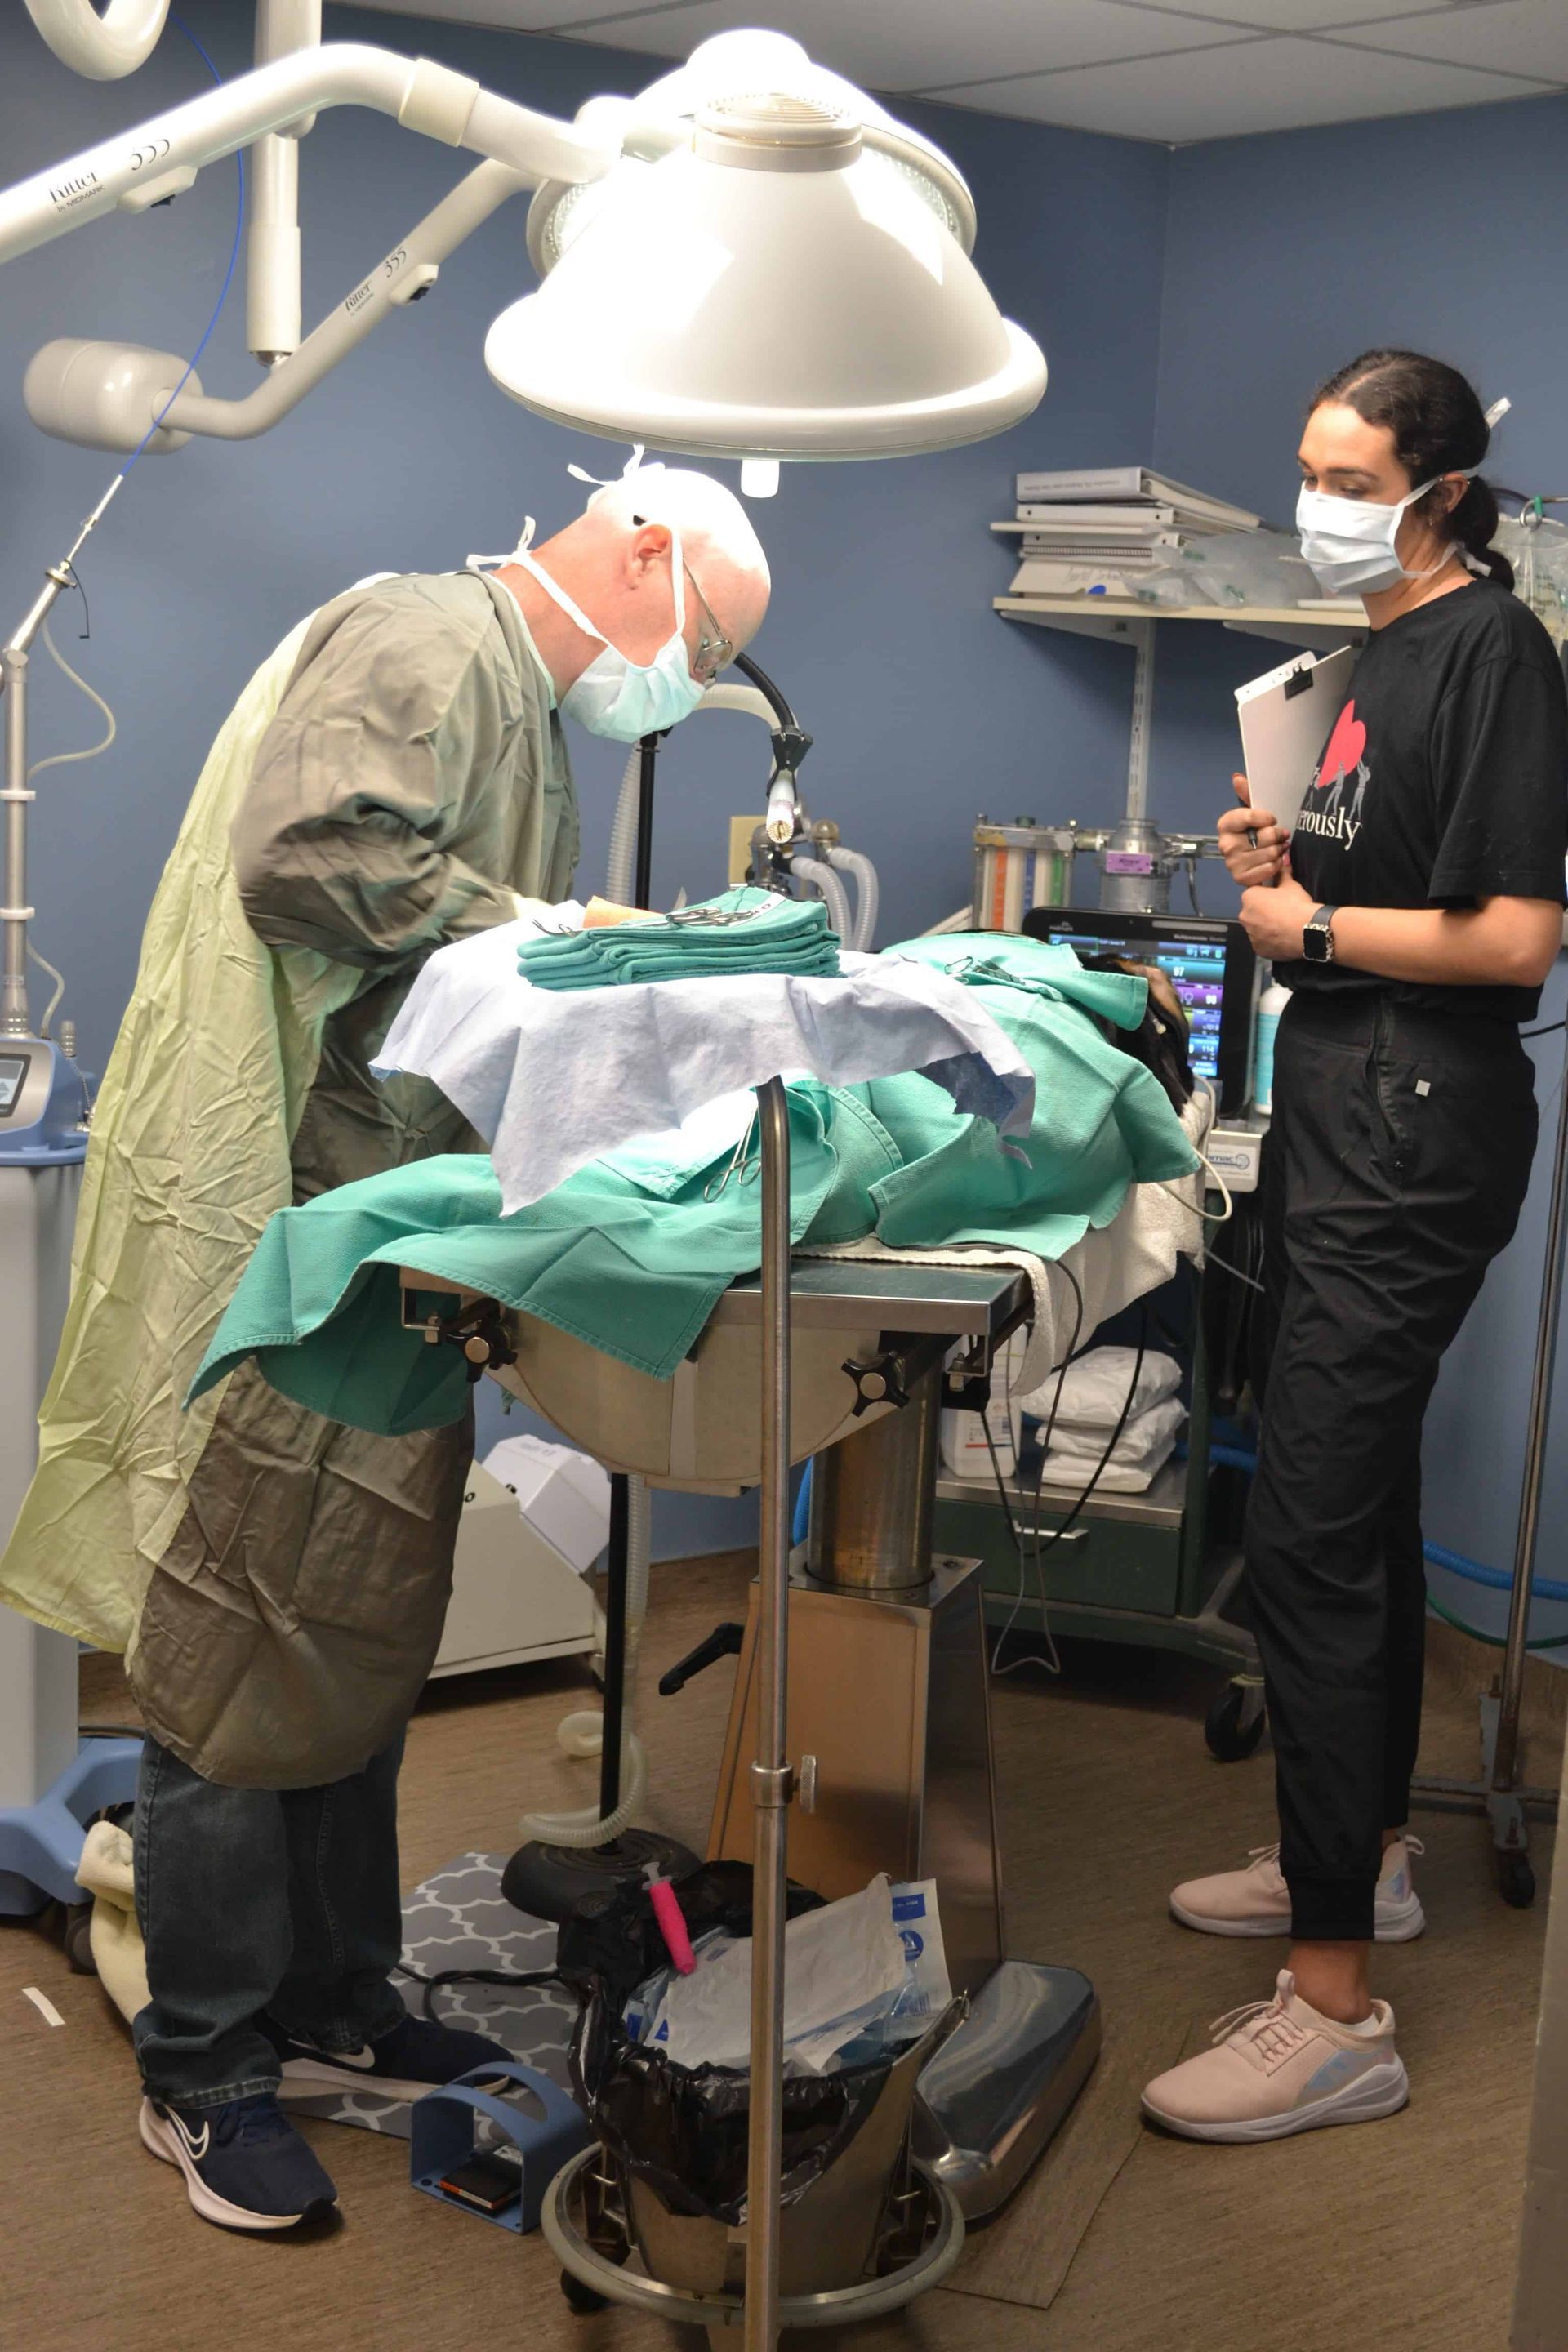 veterinarian in animal family veterinary care center performing surgery